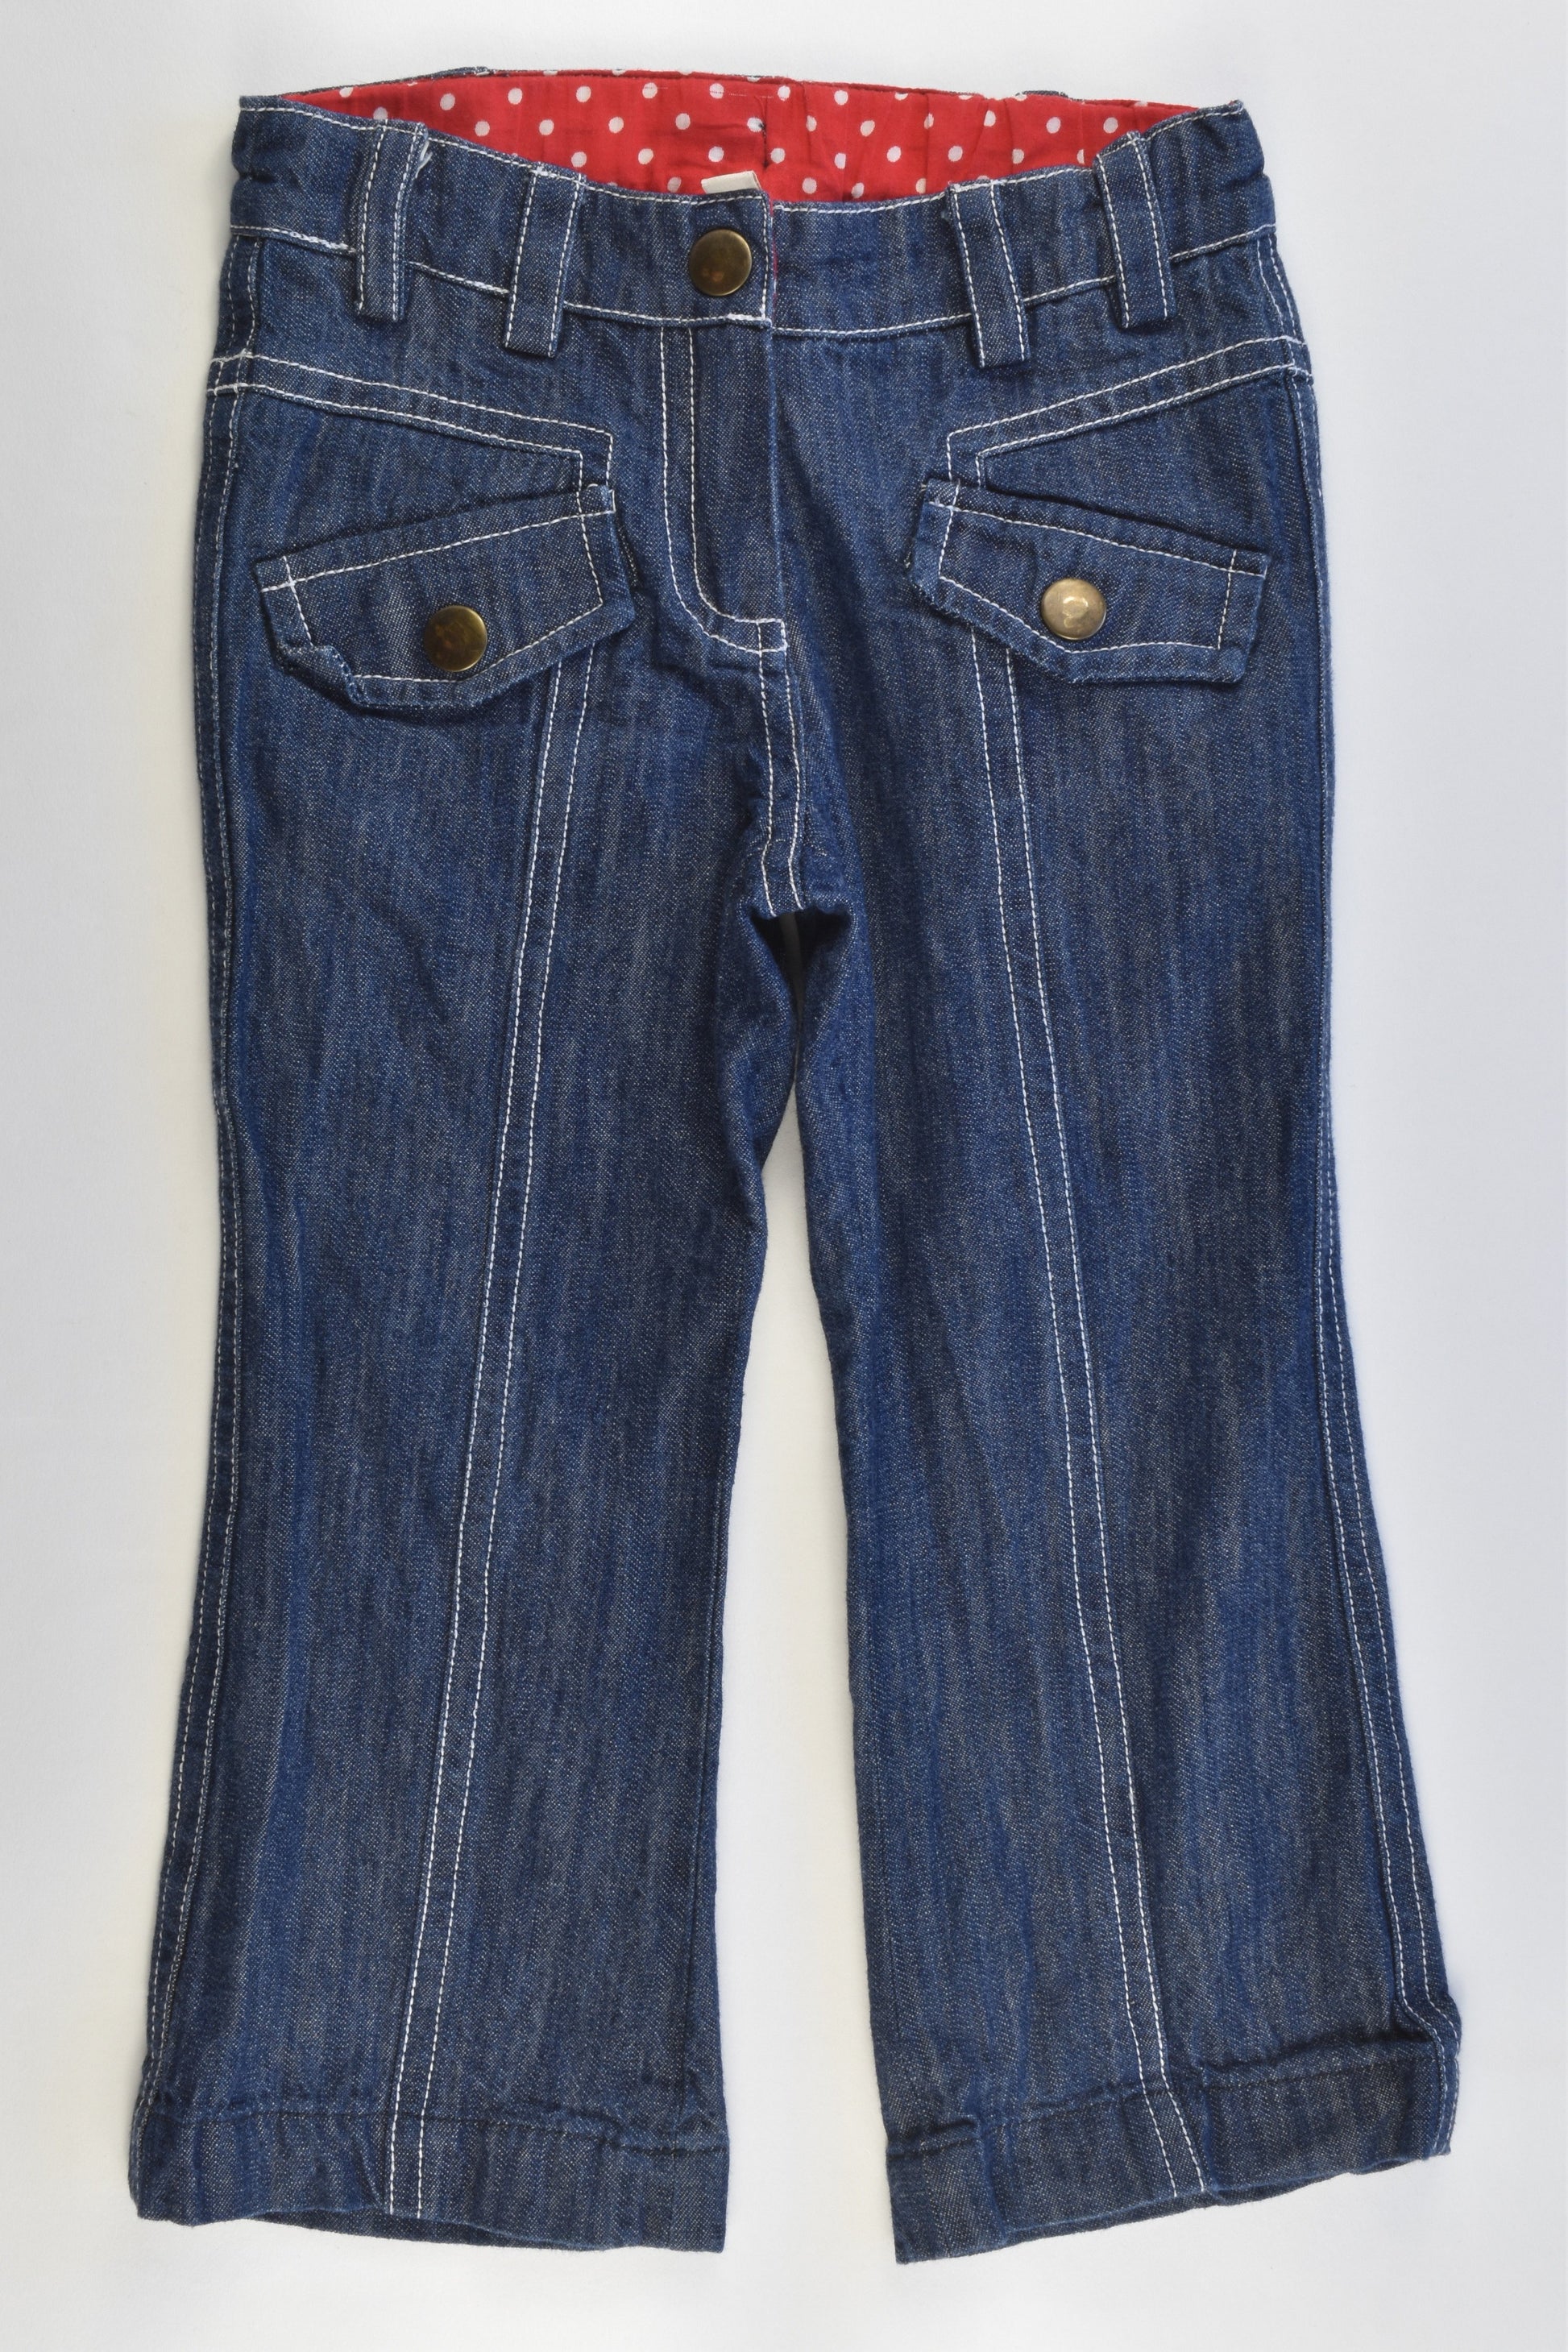 Eternal Creation Size 2 Soft and Stretchy Denim Pants